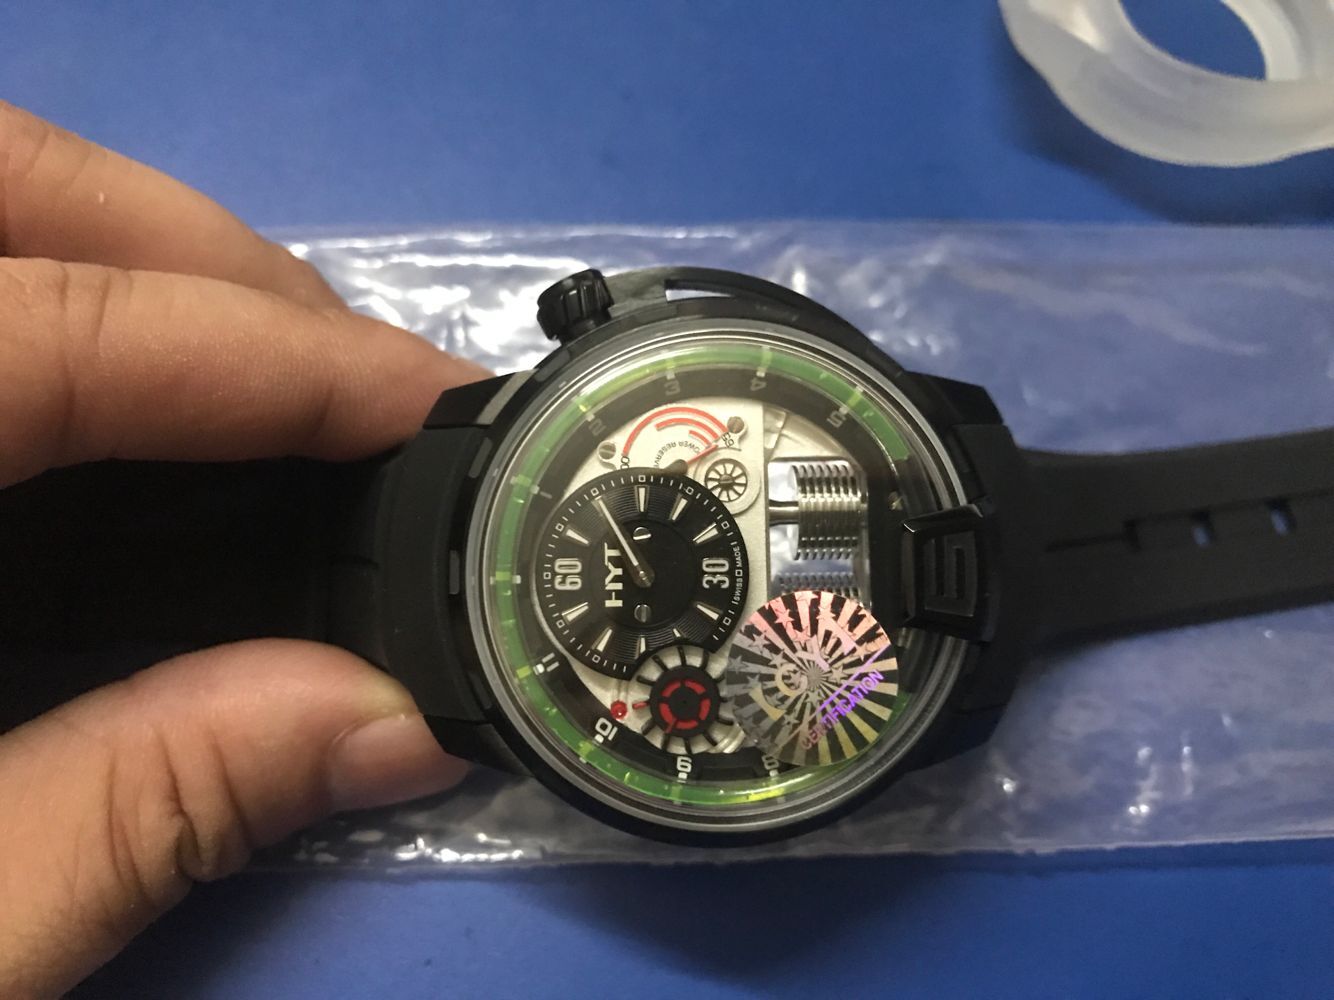 340USD for HYT watch from this way